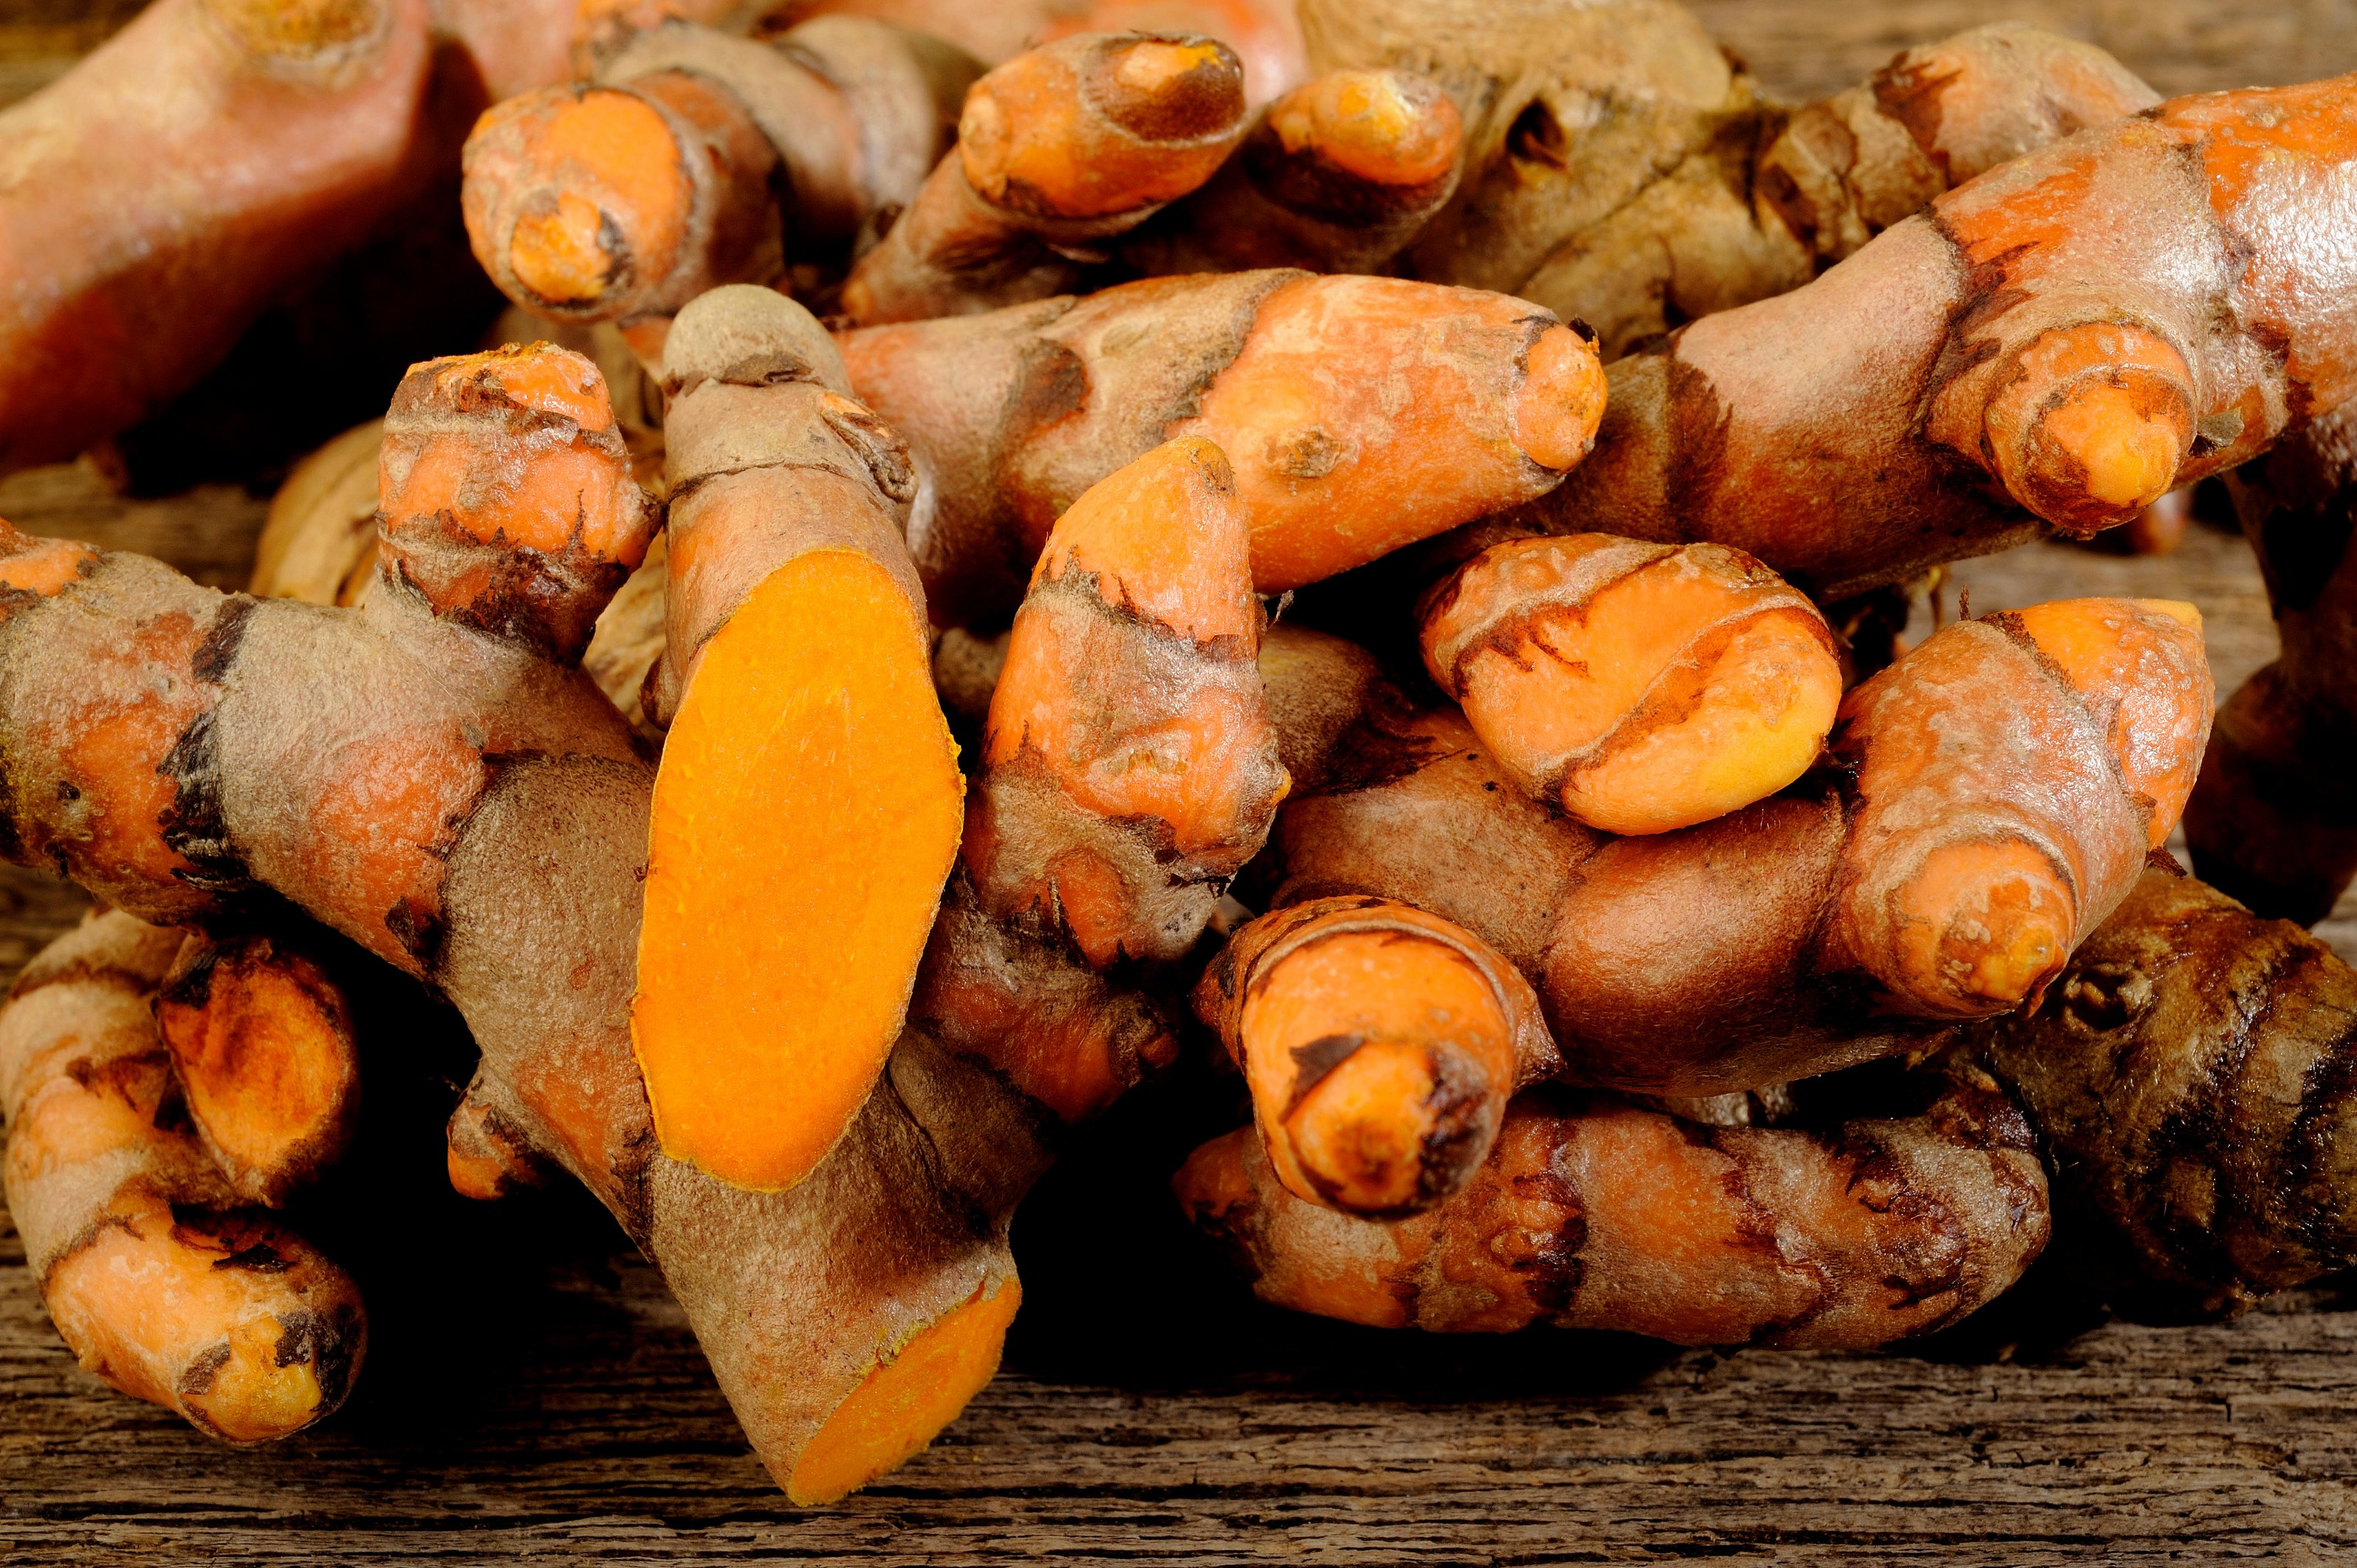 Genome of turmeric plant decoded